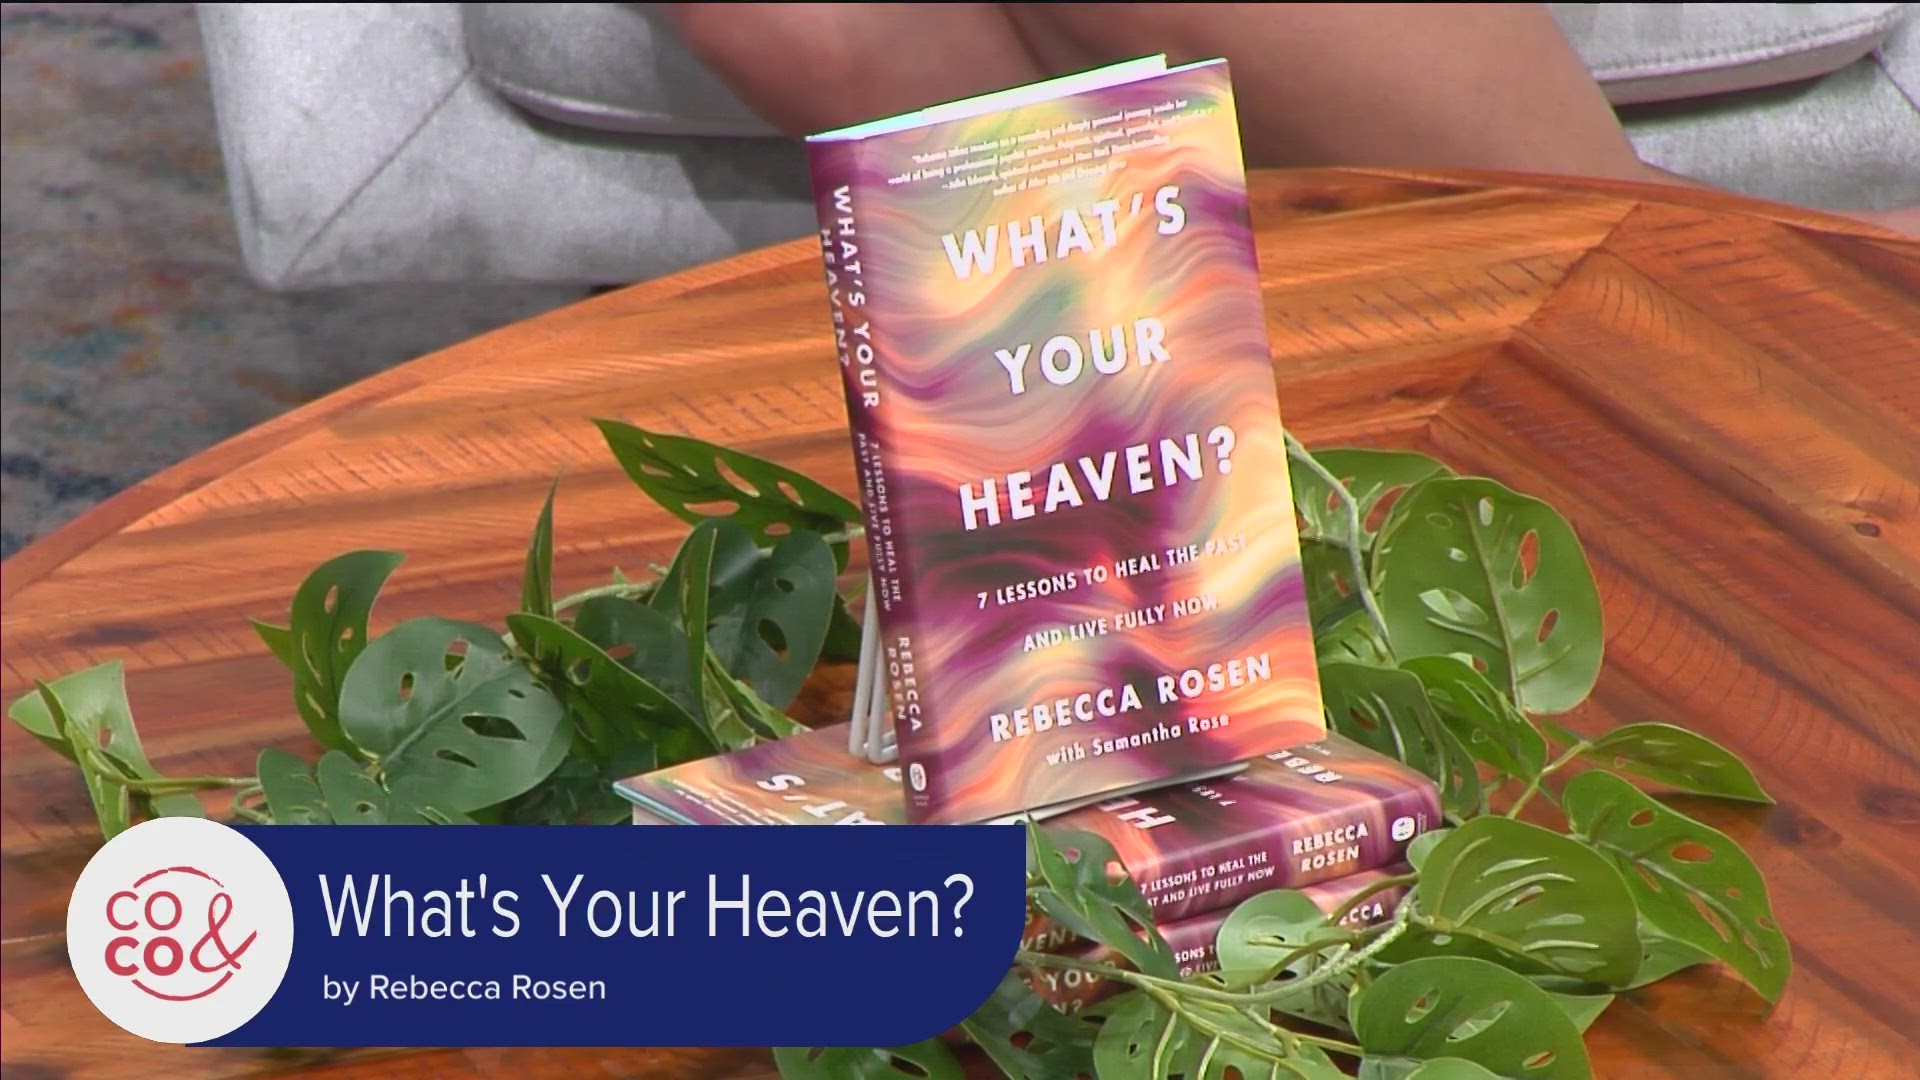 Rebecca's new book is available now wherever books are sold.